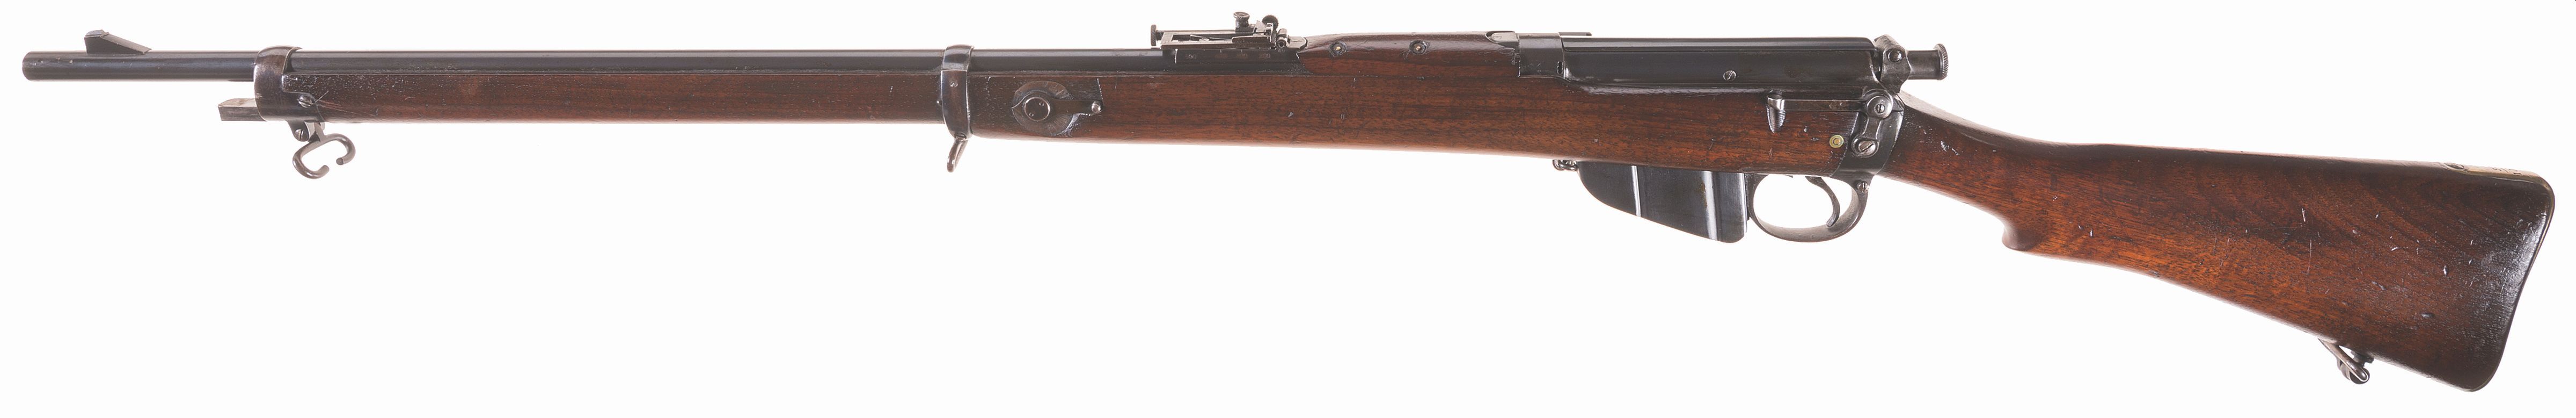 Lot 107 - L39A1 7.62 Lee Enfield rifle LICENCE